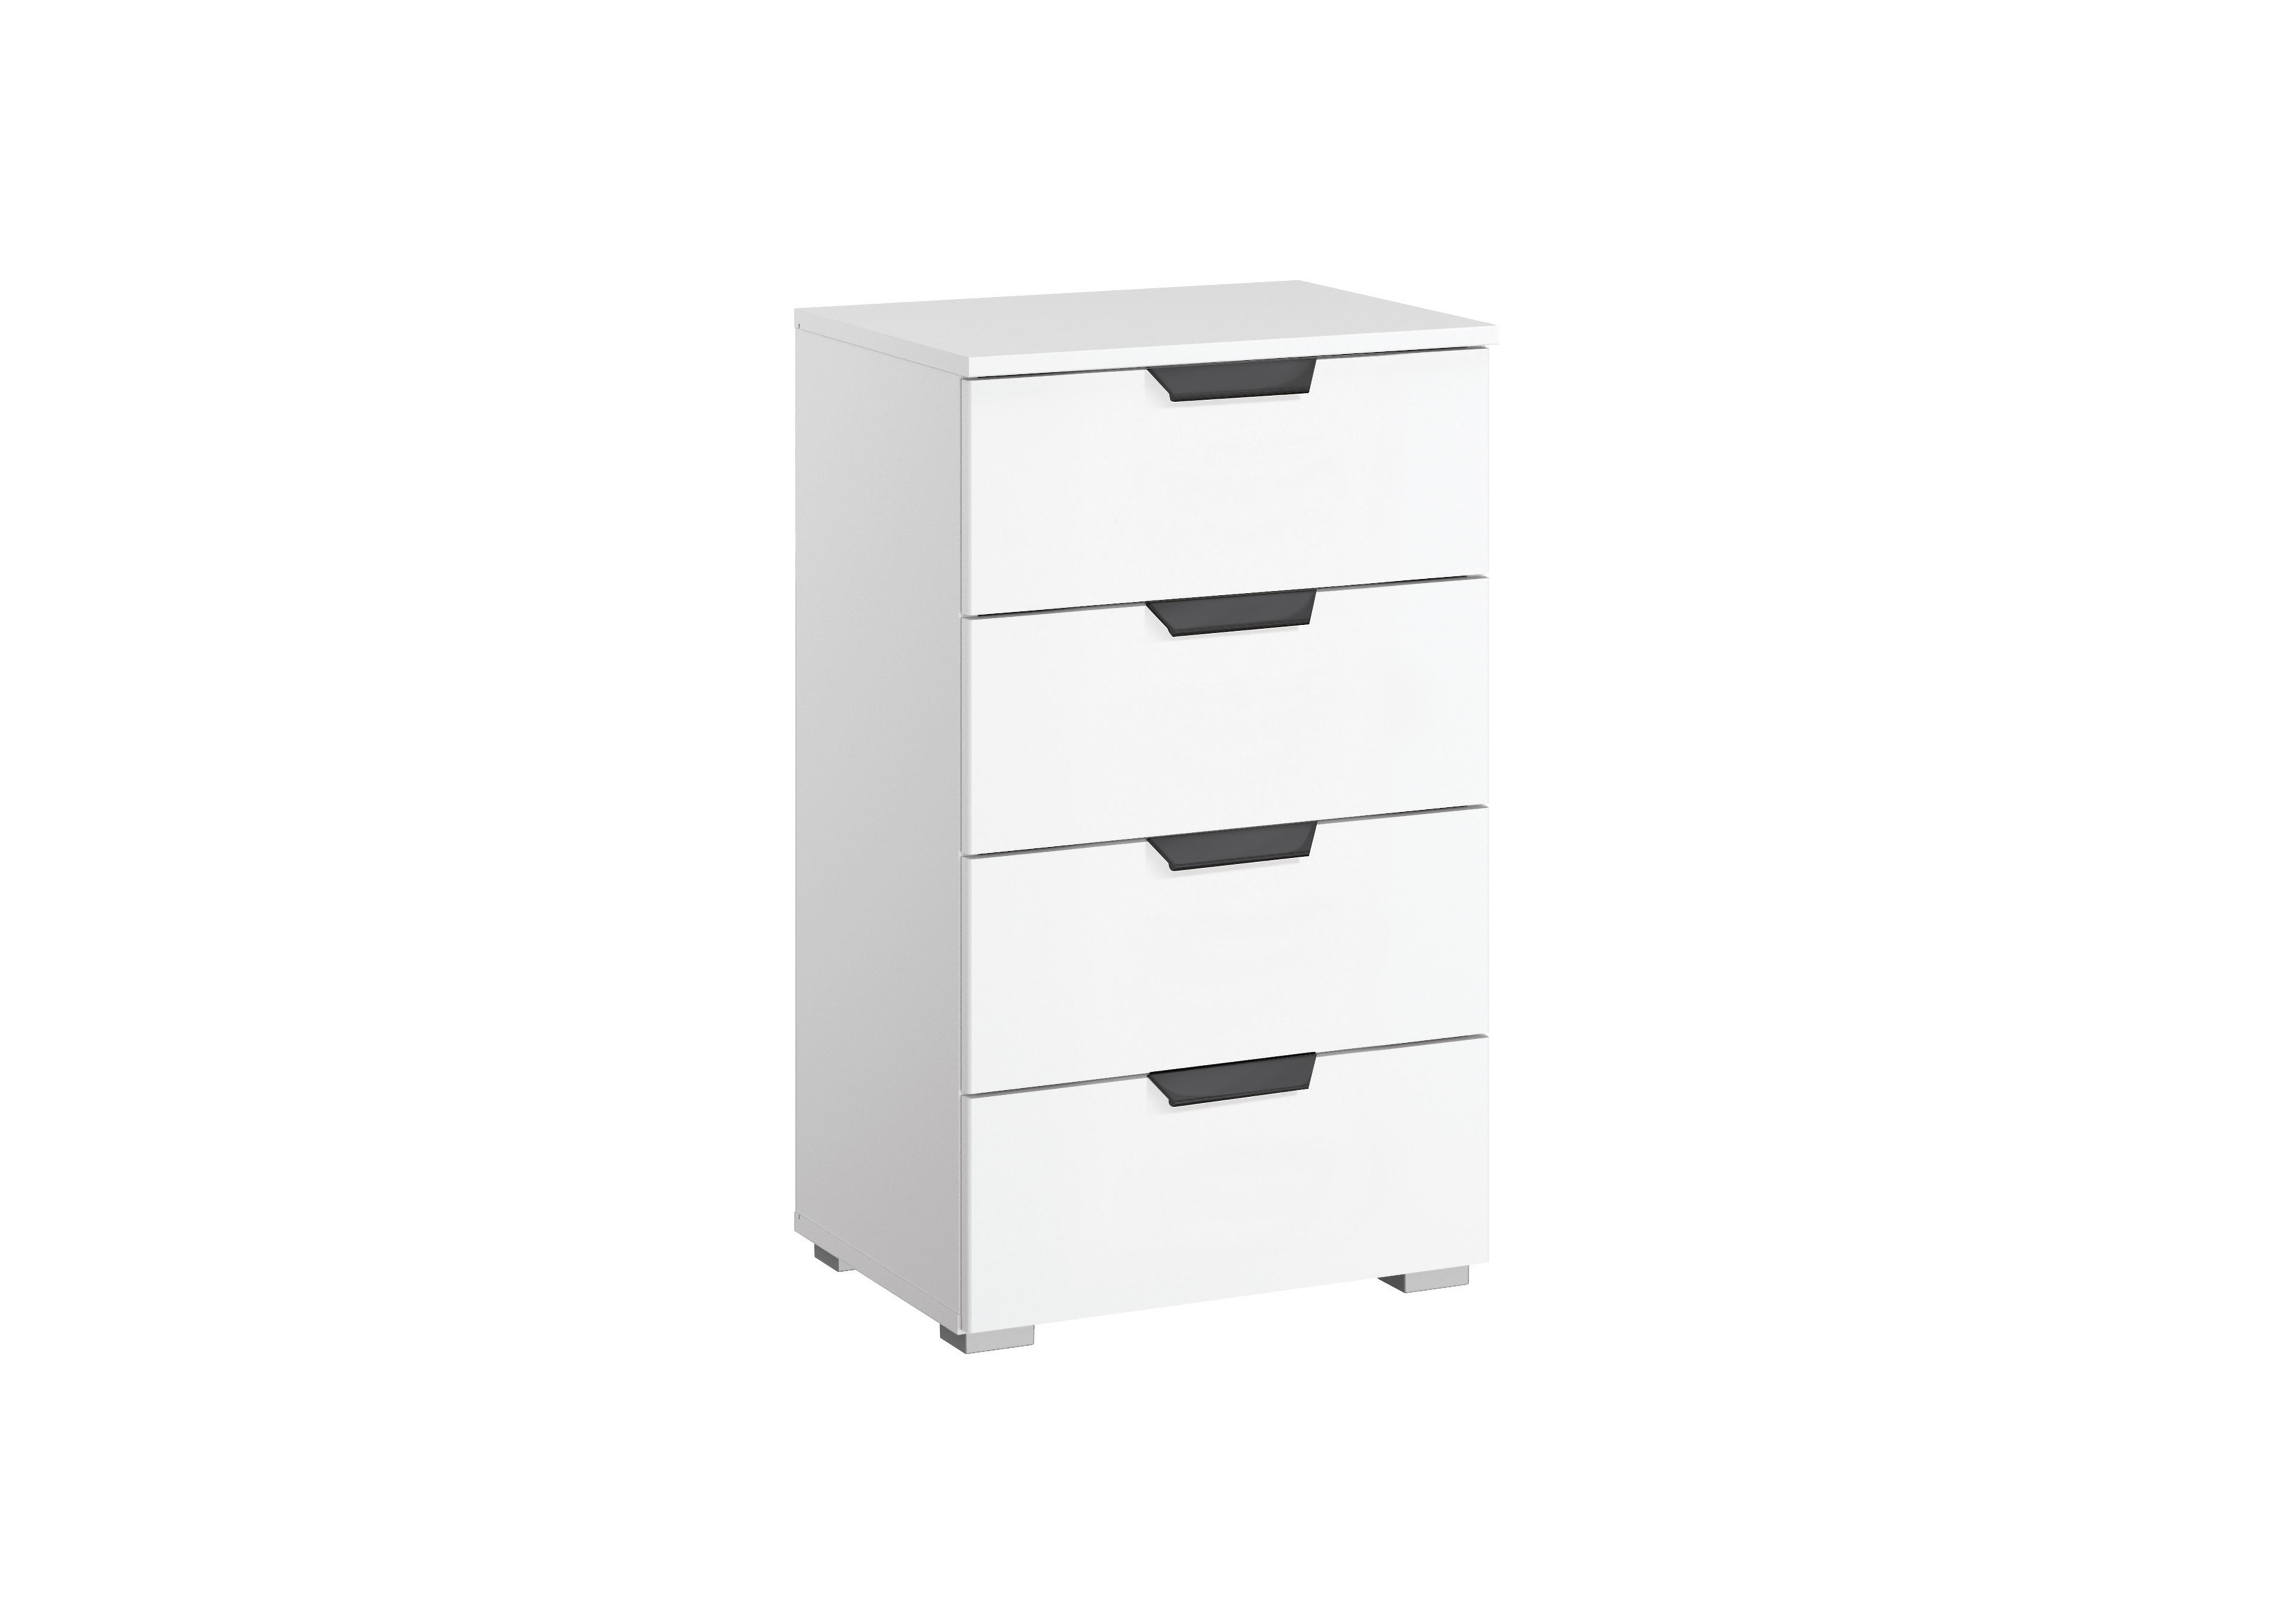 Lima 4 Drawer Chest with Decor Front in A970w Alp Wht/Alp Wht on Furniture Village